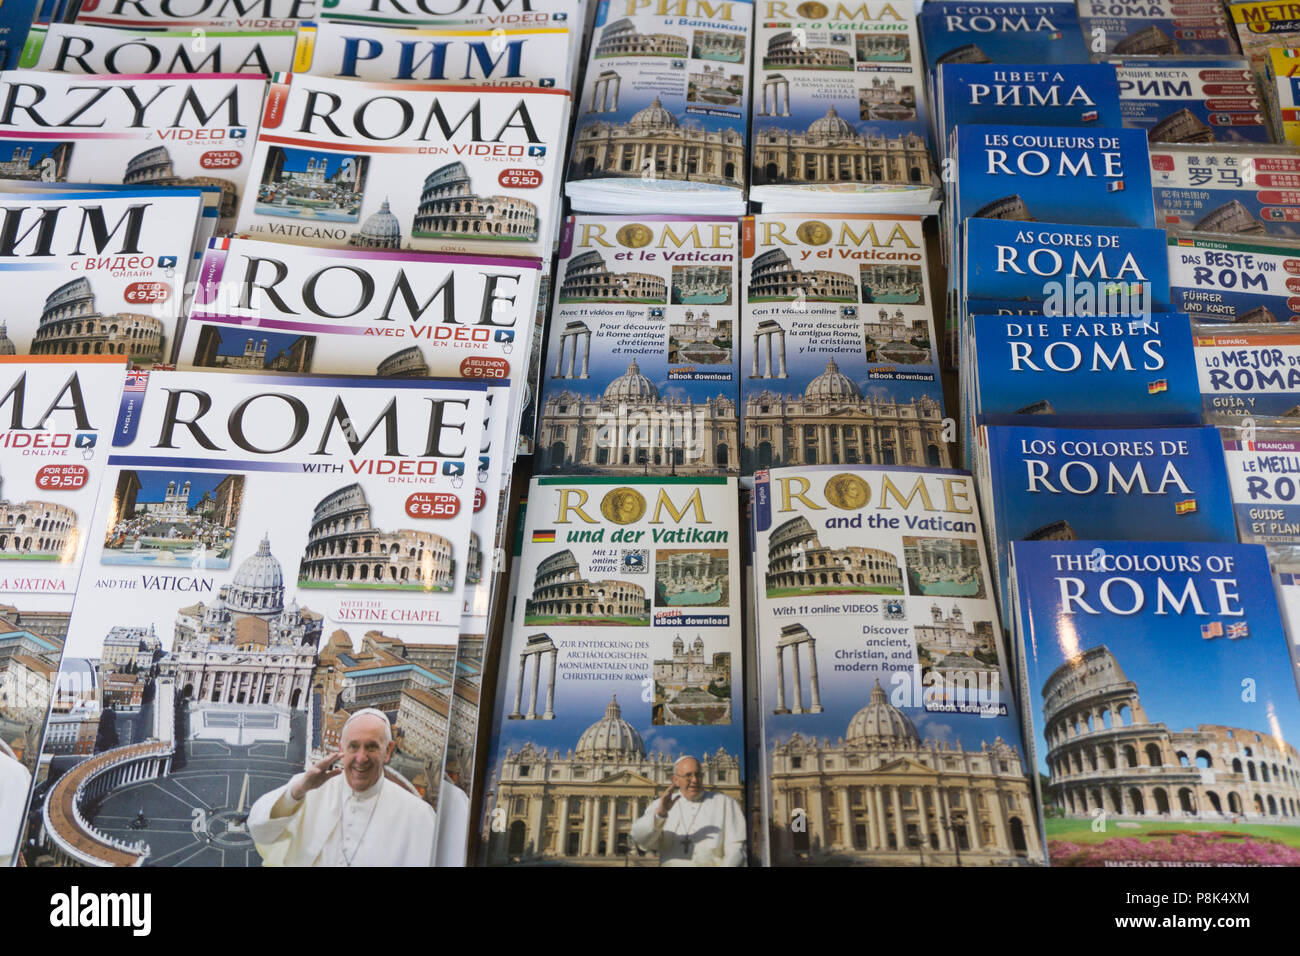 ROME, ITALY - JUNE 16th 2018: Tourist travel guide books for Rome on sale at a market Stock Photo